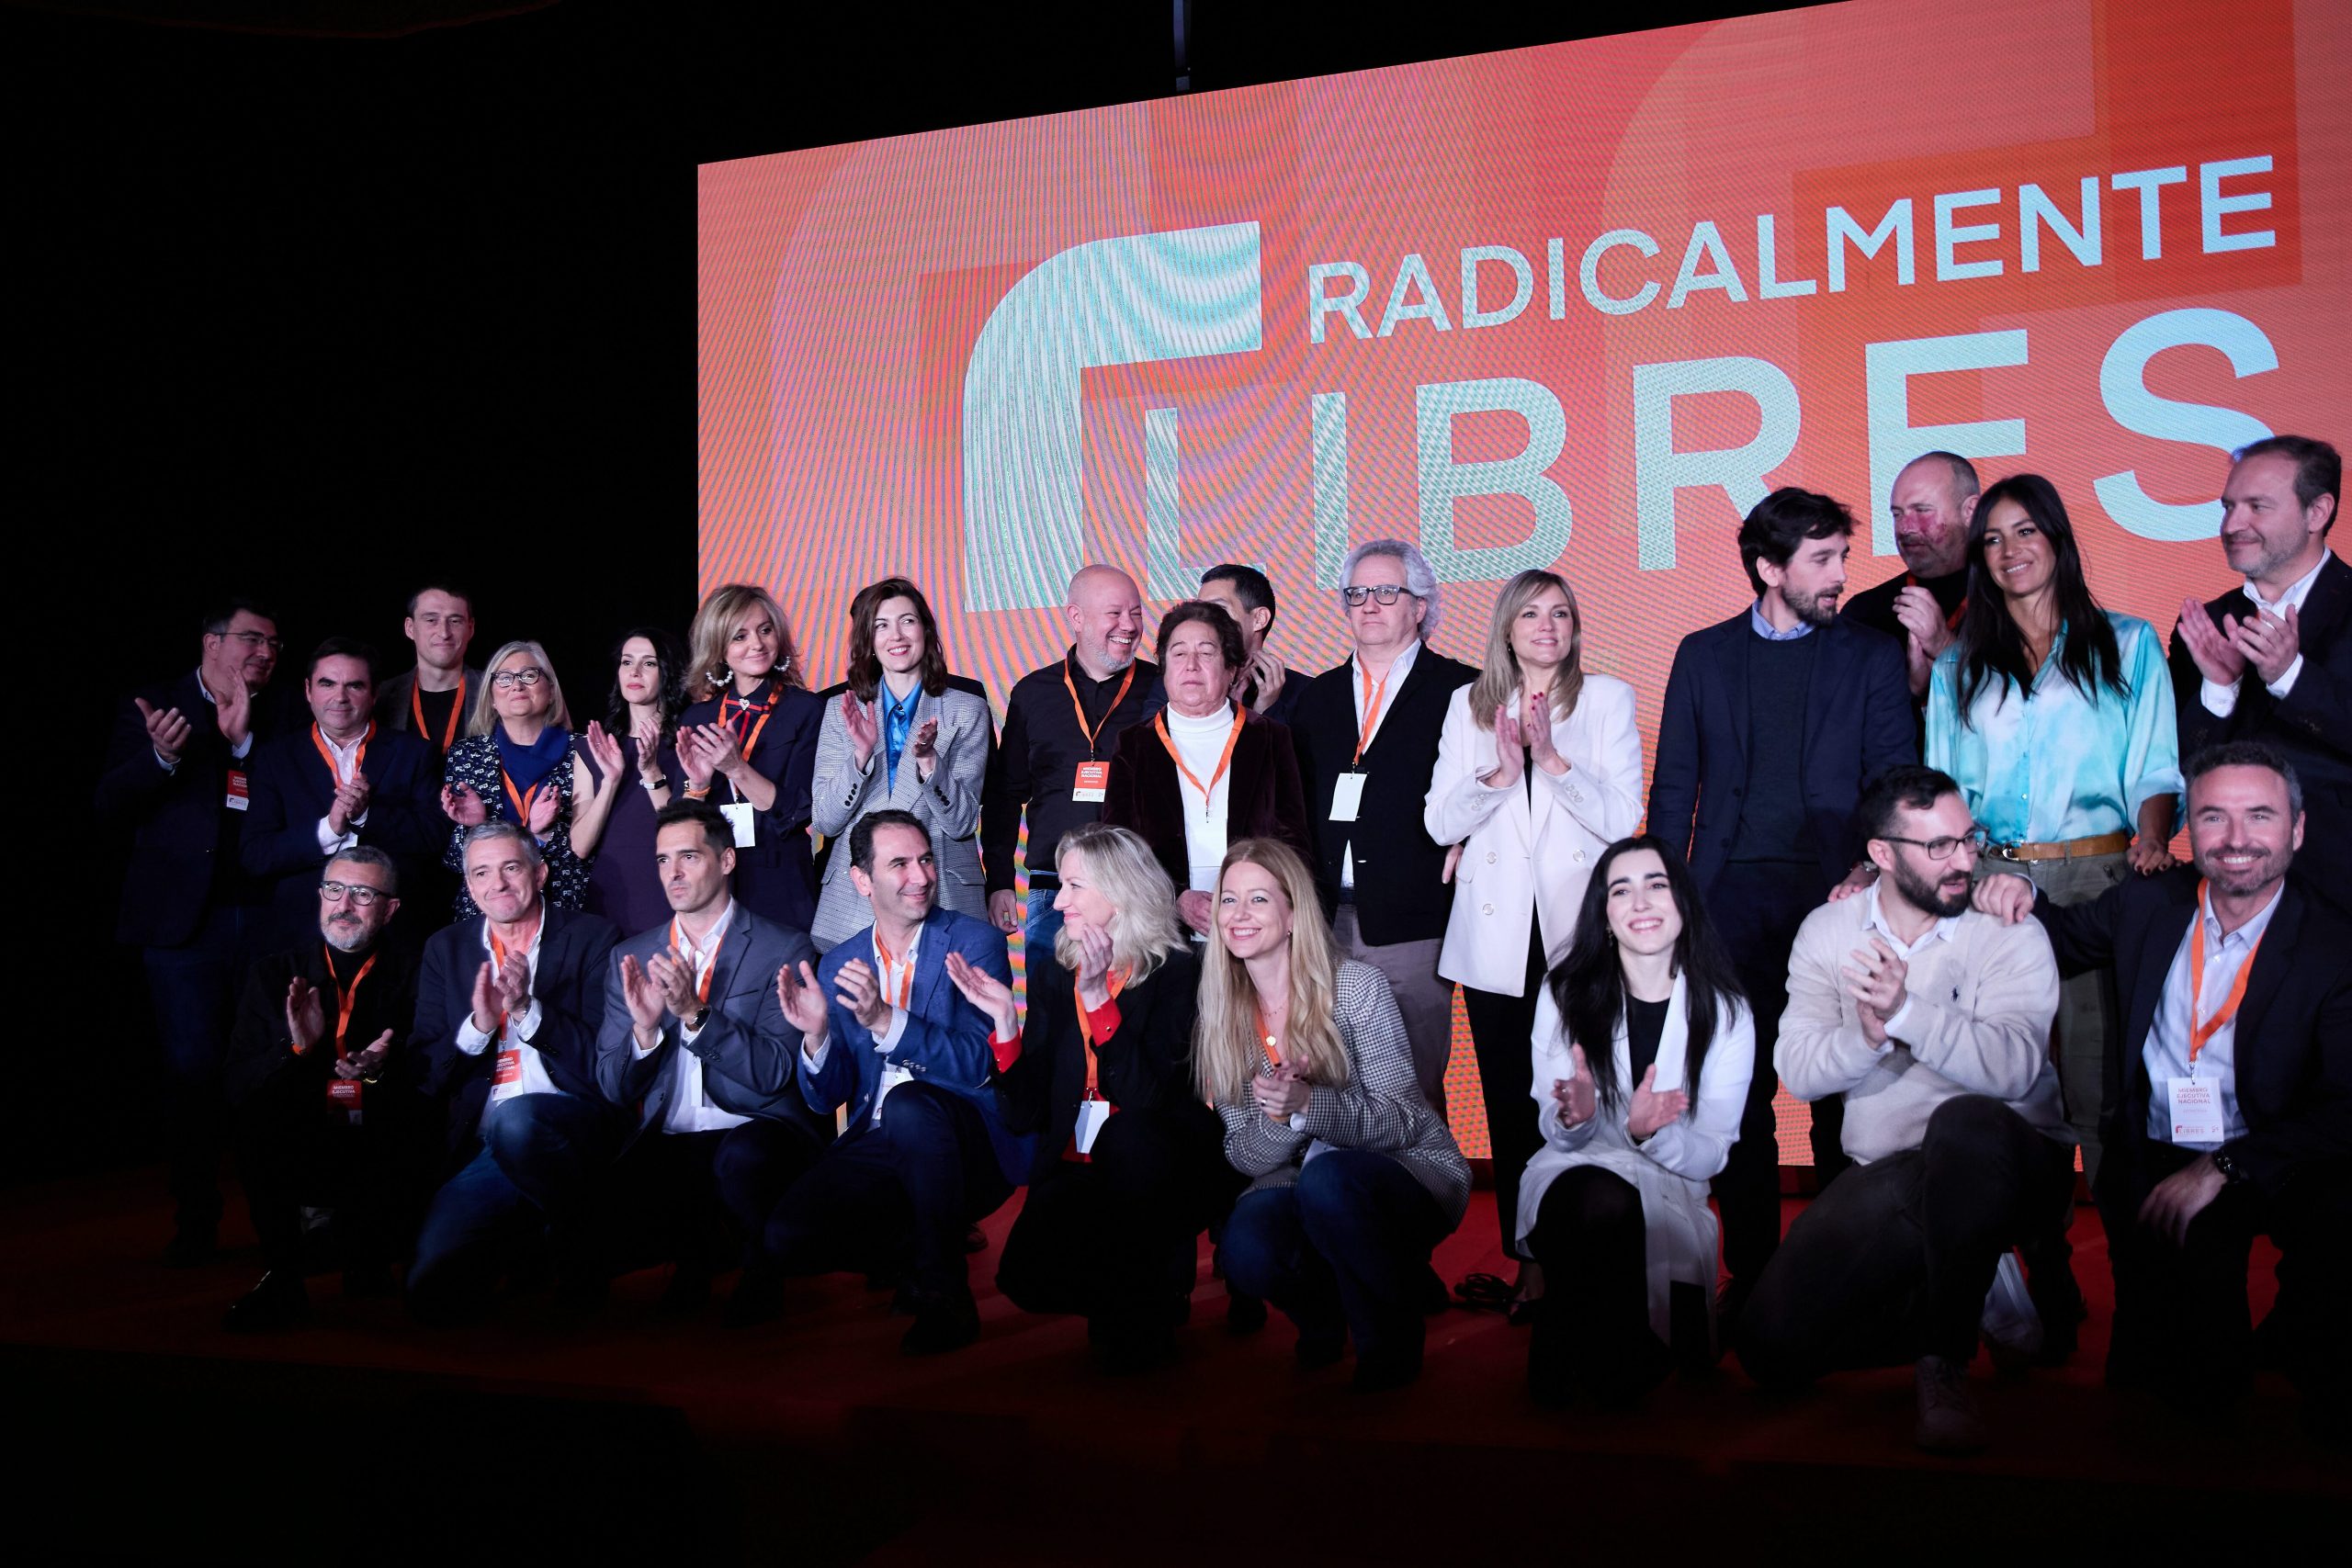 Spain's centrist Ciudadanos party will not stand in July's general election